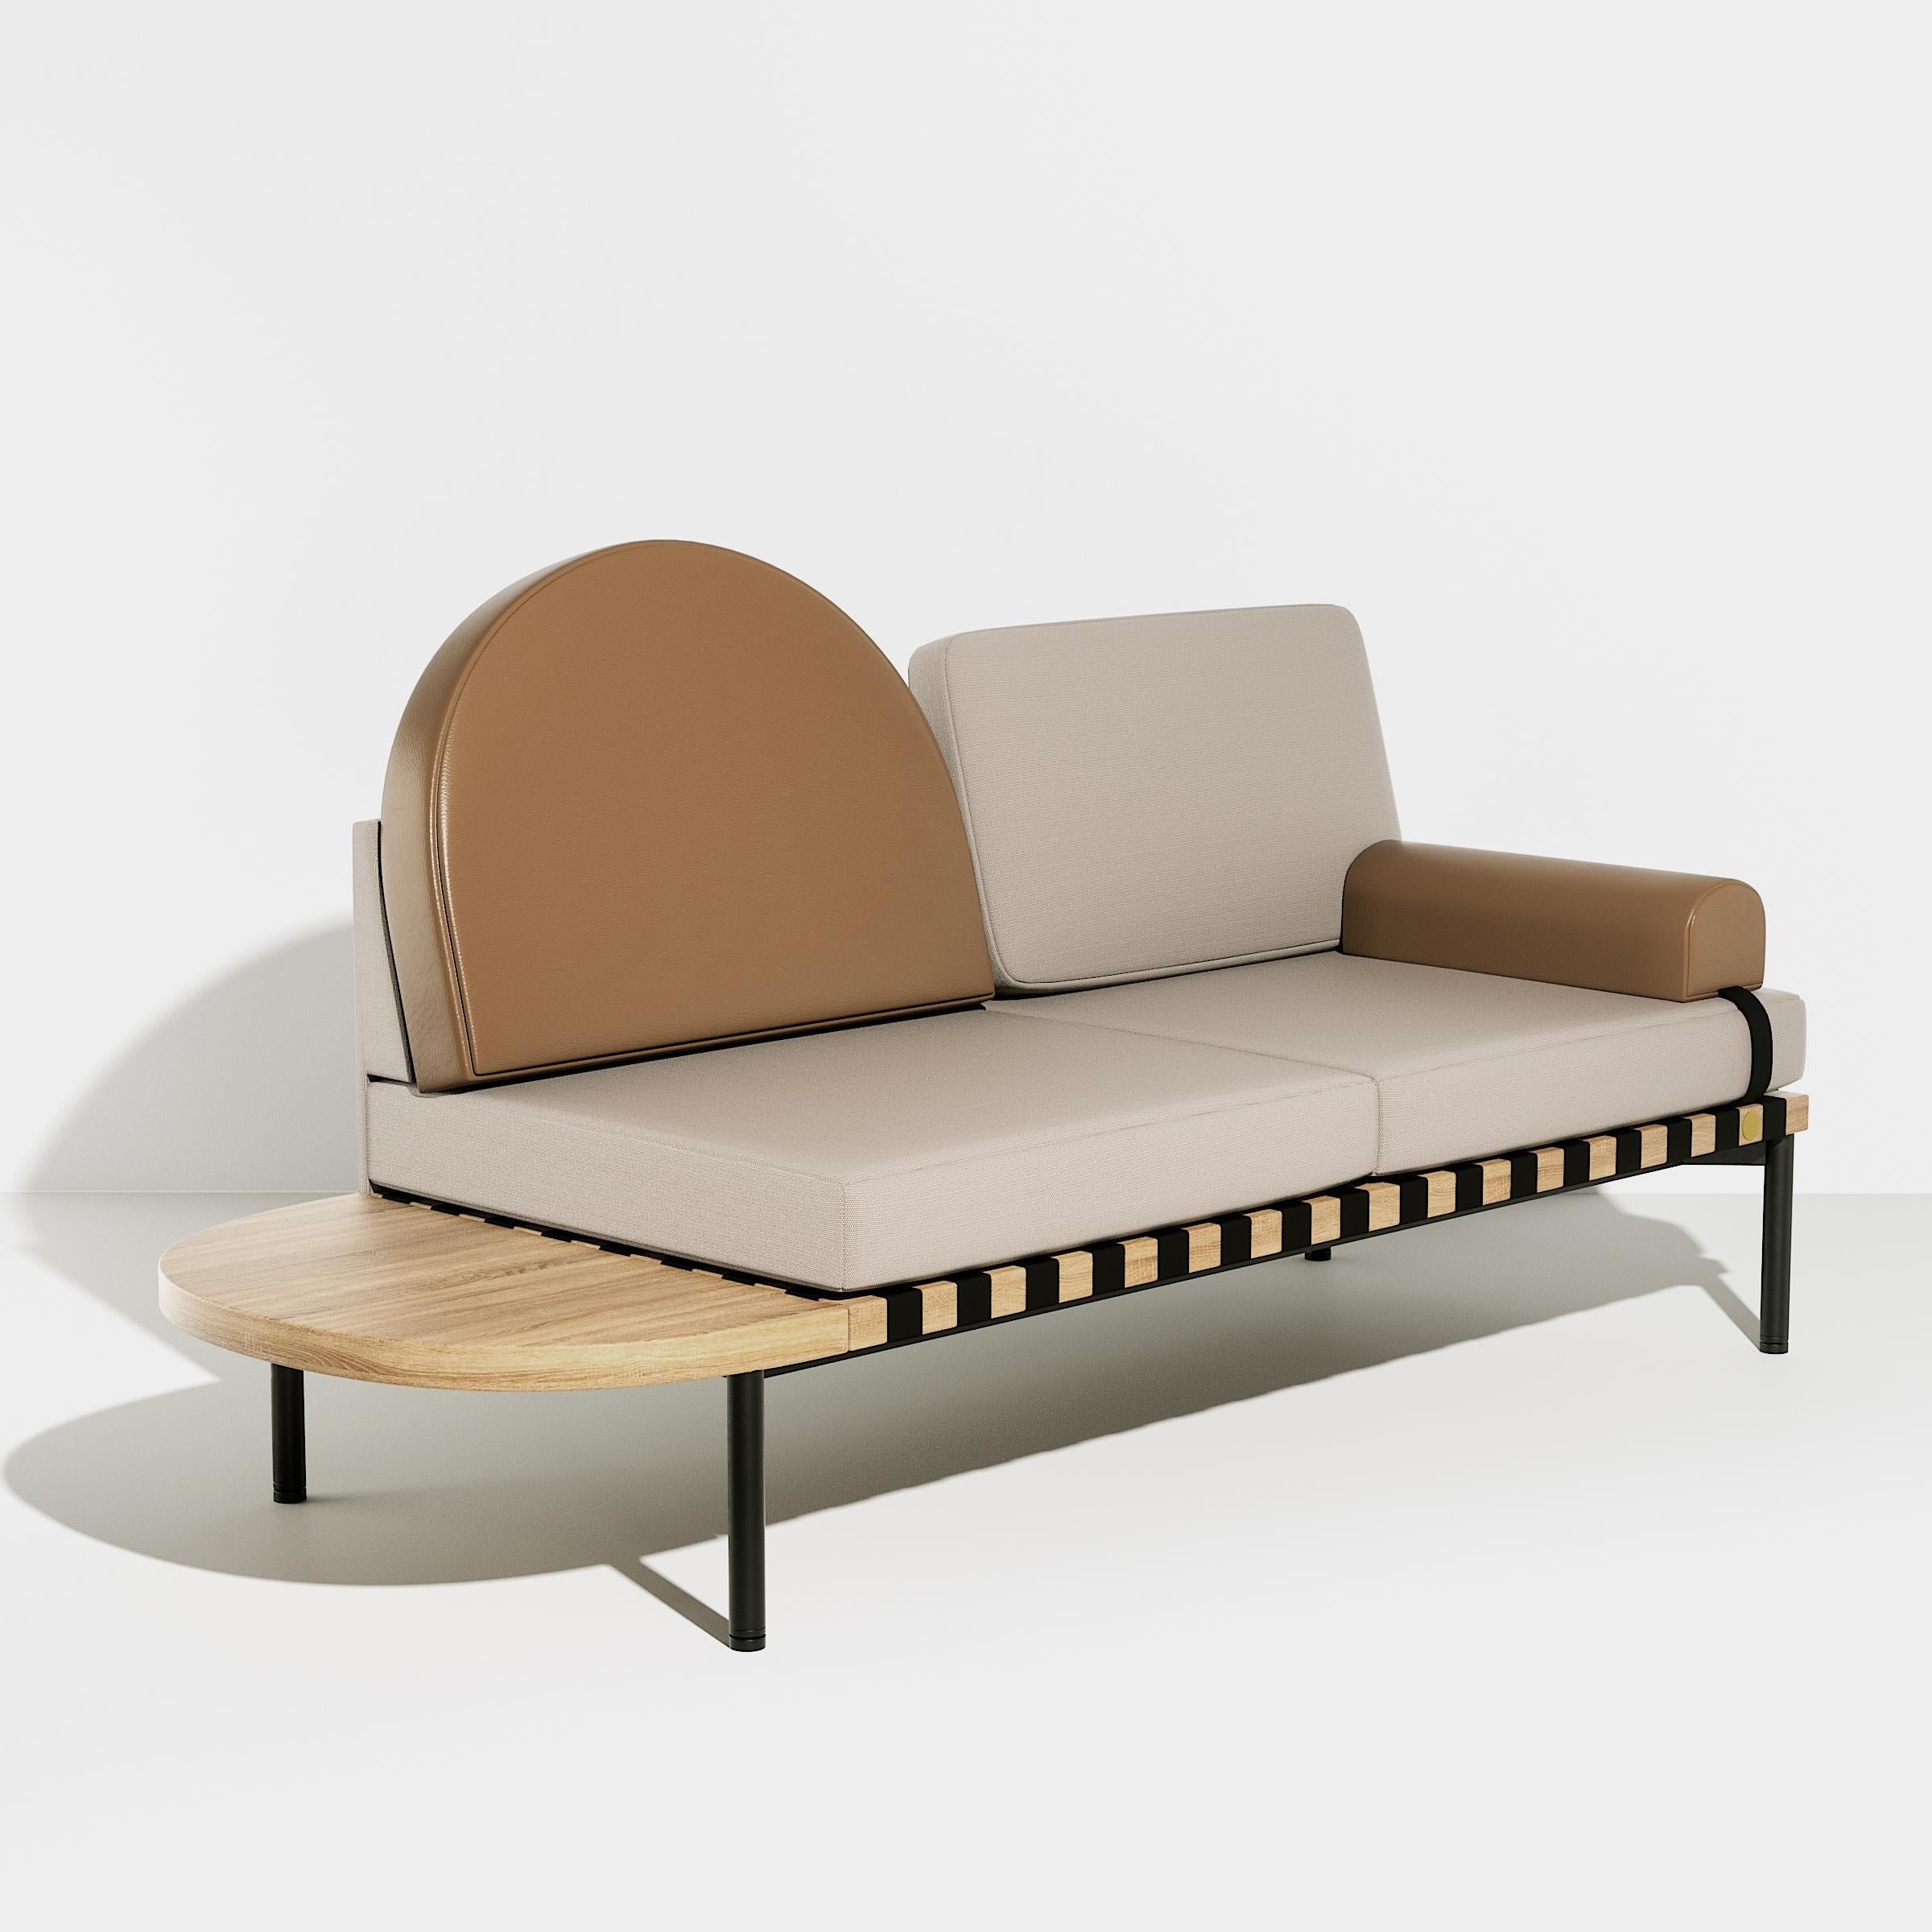 Petite Friture Grid Daybed in Grey-beige Upholstery by Studio Pool, 2015

Pool designed the Grid collection in reference to the Bauhaus style and in honour of the graphic talents. Each element of this all-modular system retains the identity of the